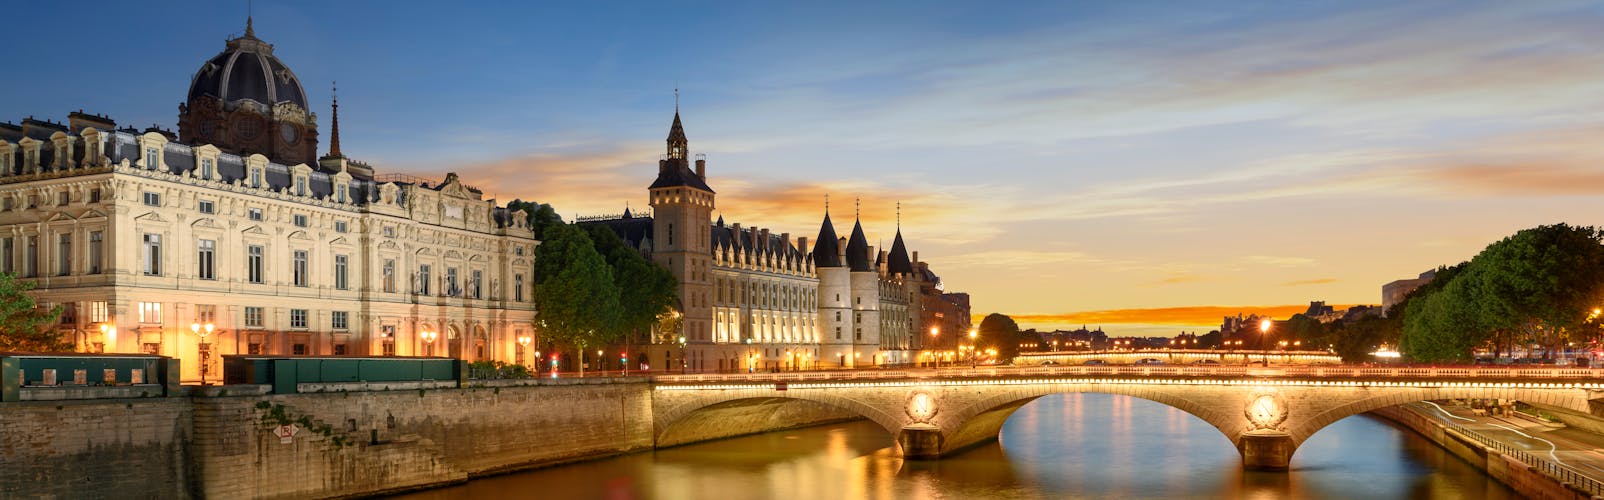 Photo of Consiergerie, Pont Neuf and Seine river at sunny summer sunset, Paris, France